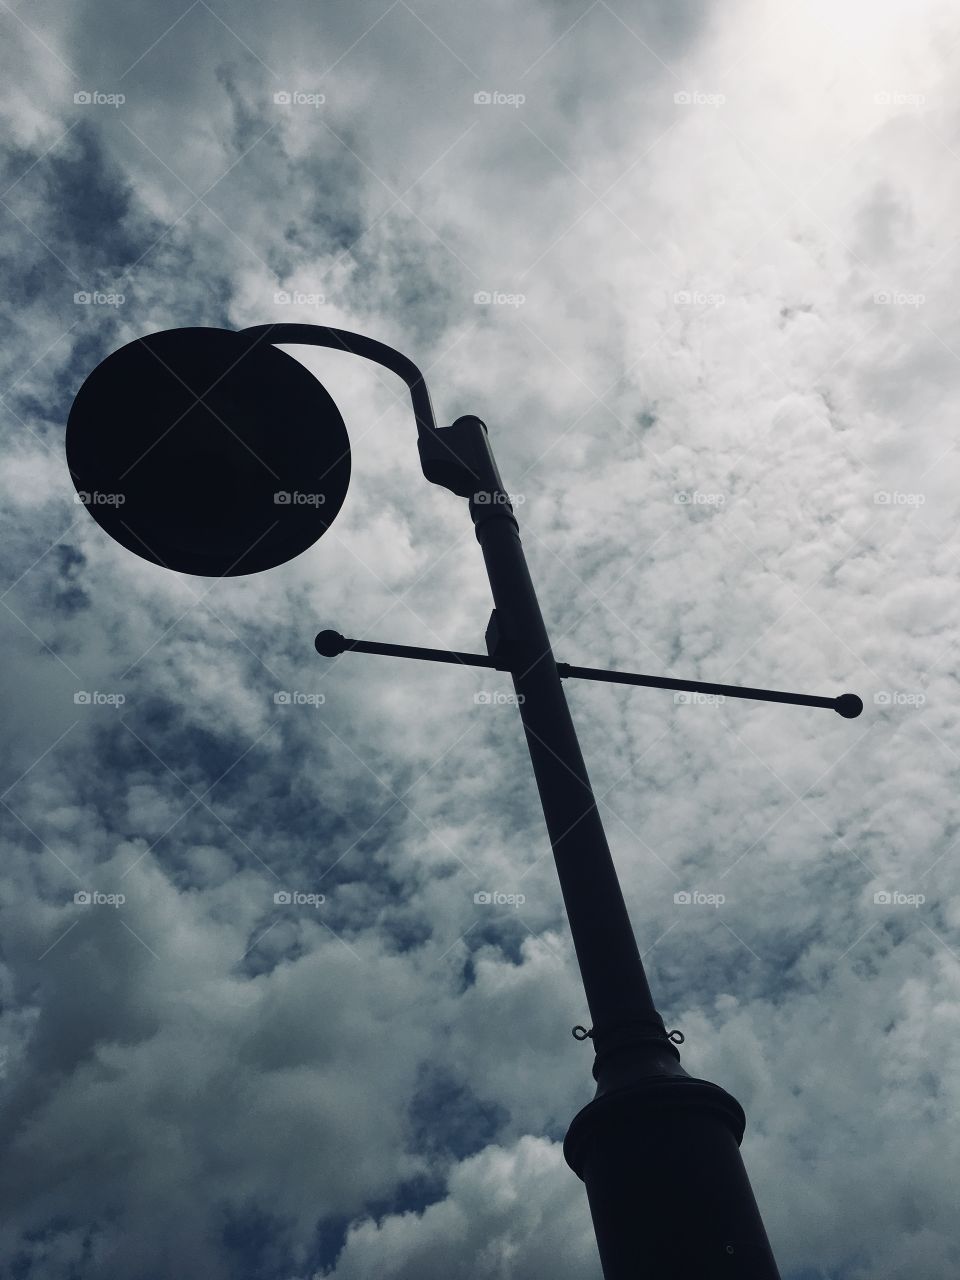 Silhouette of a lamp post